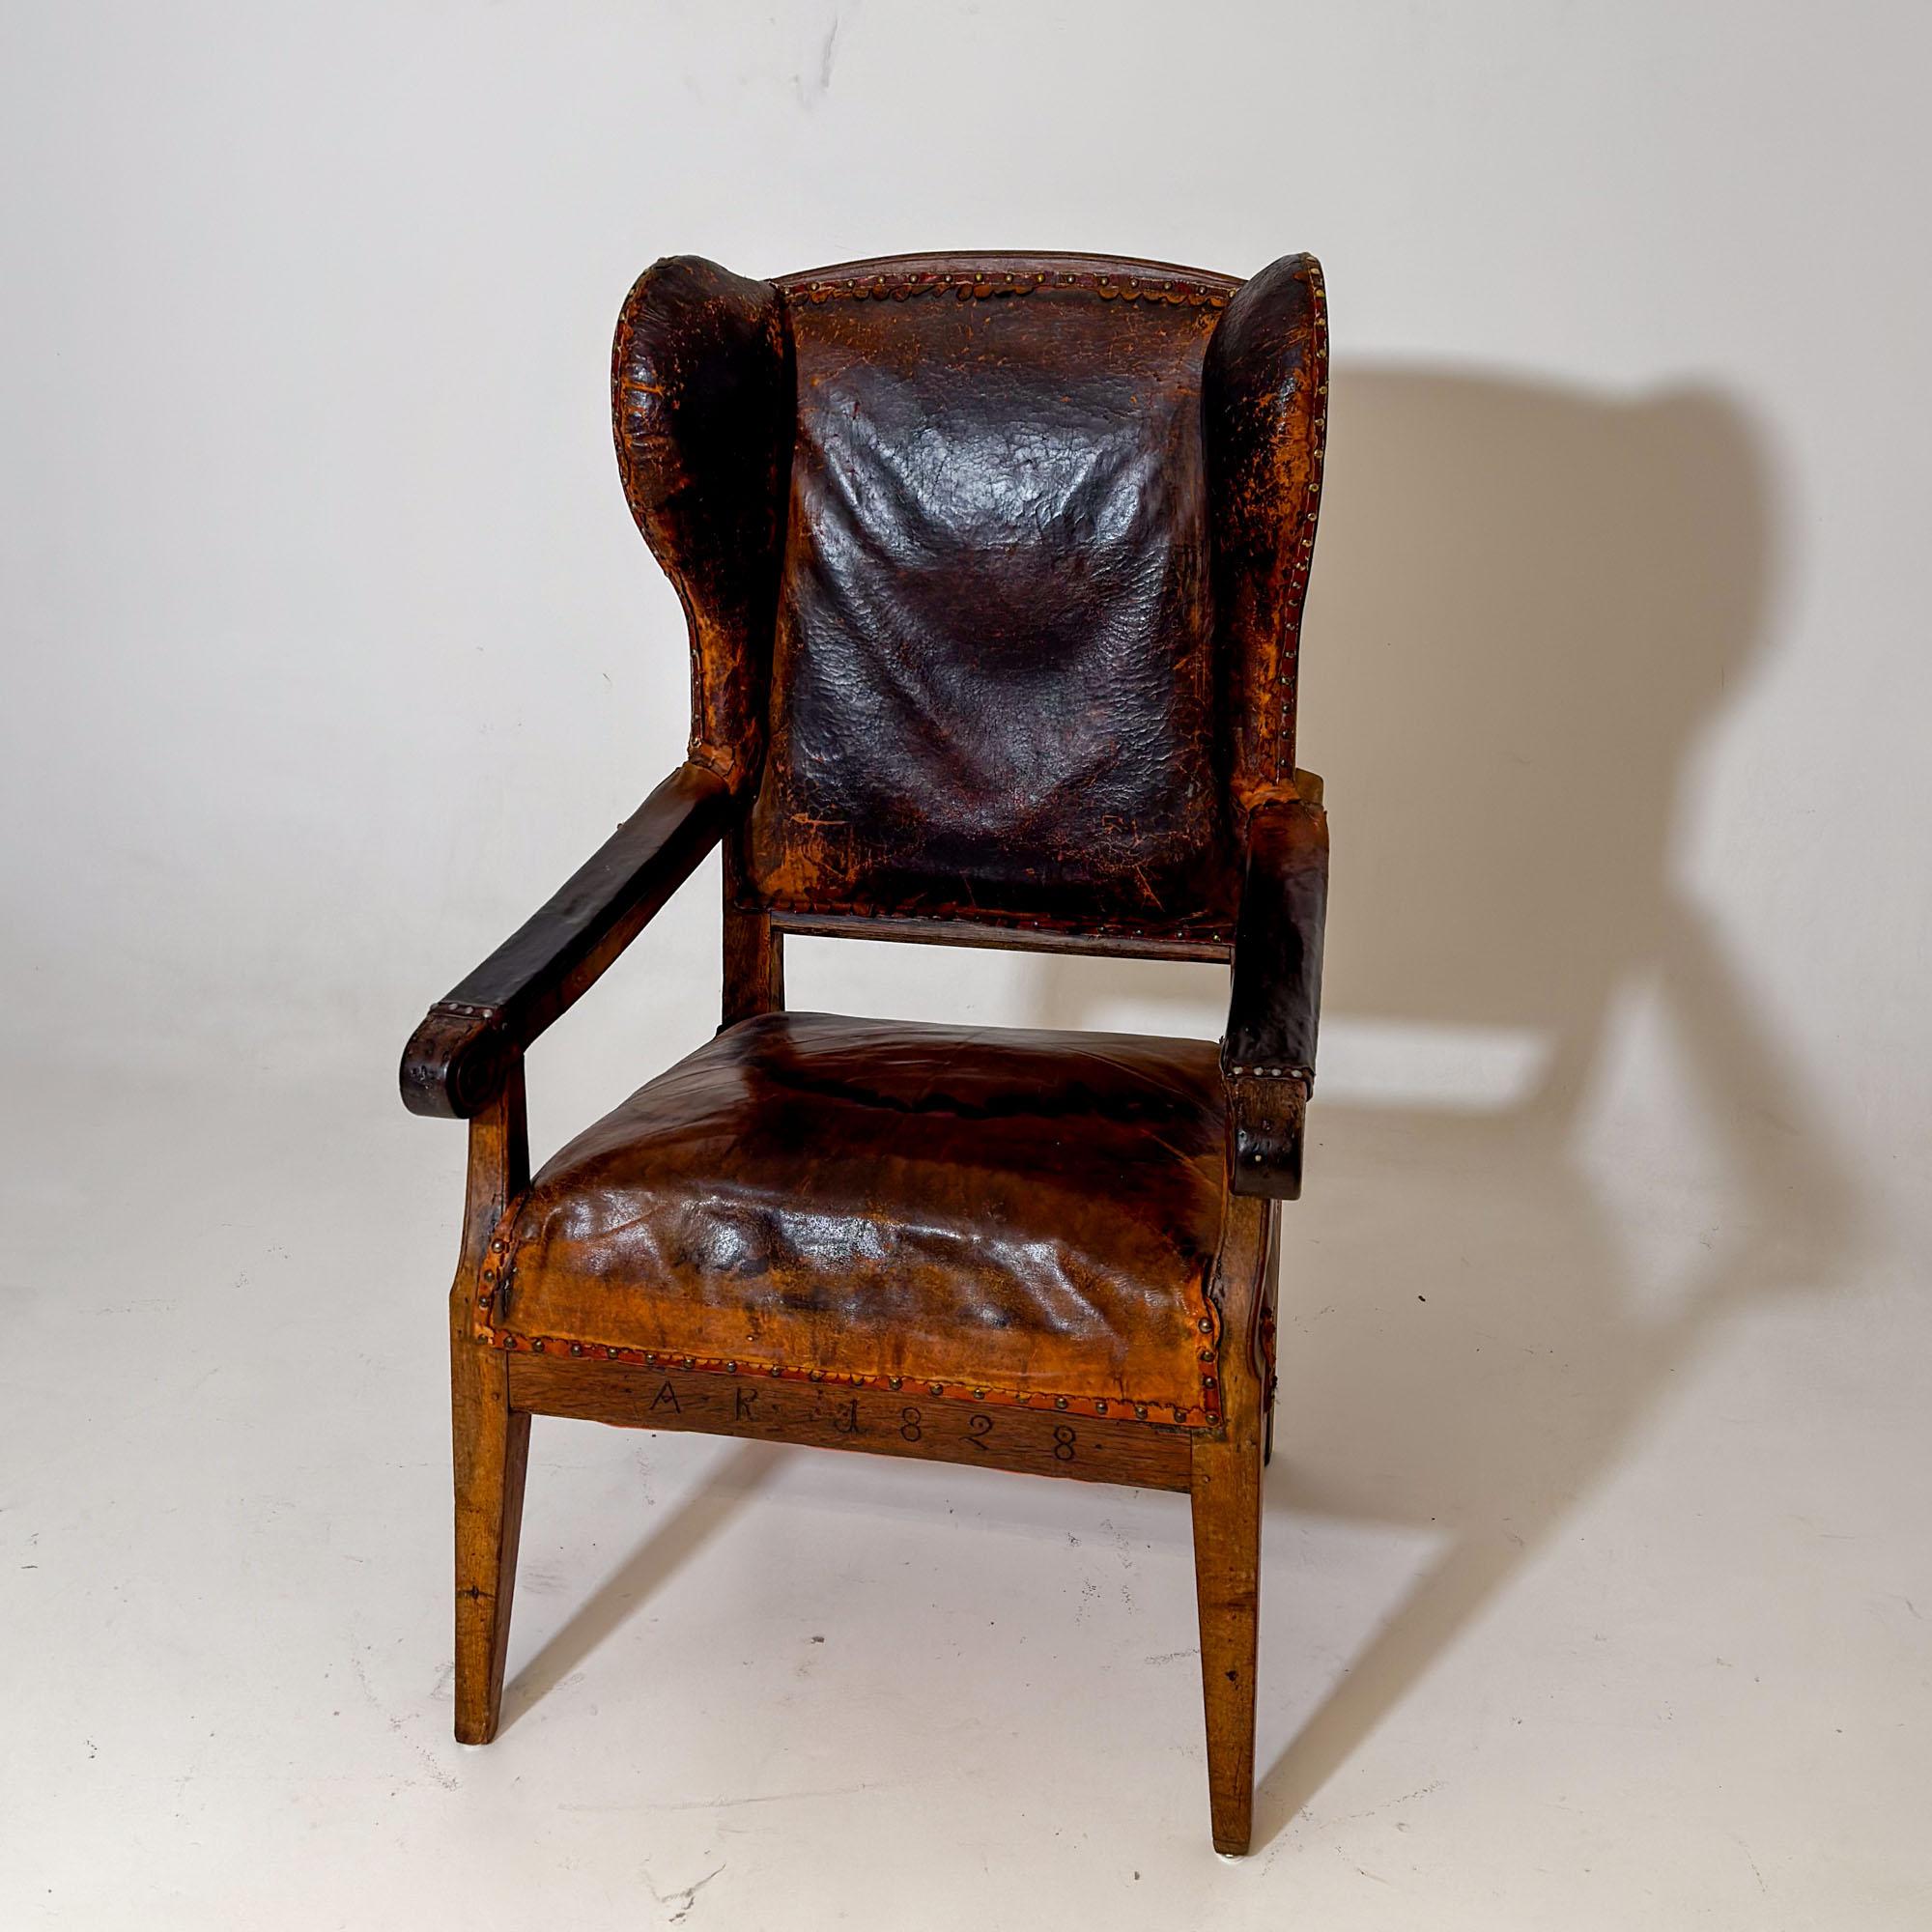 Armchair with leather upholstery, dated 1828 For Sale 2